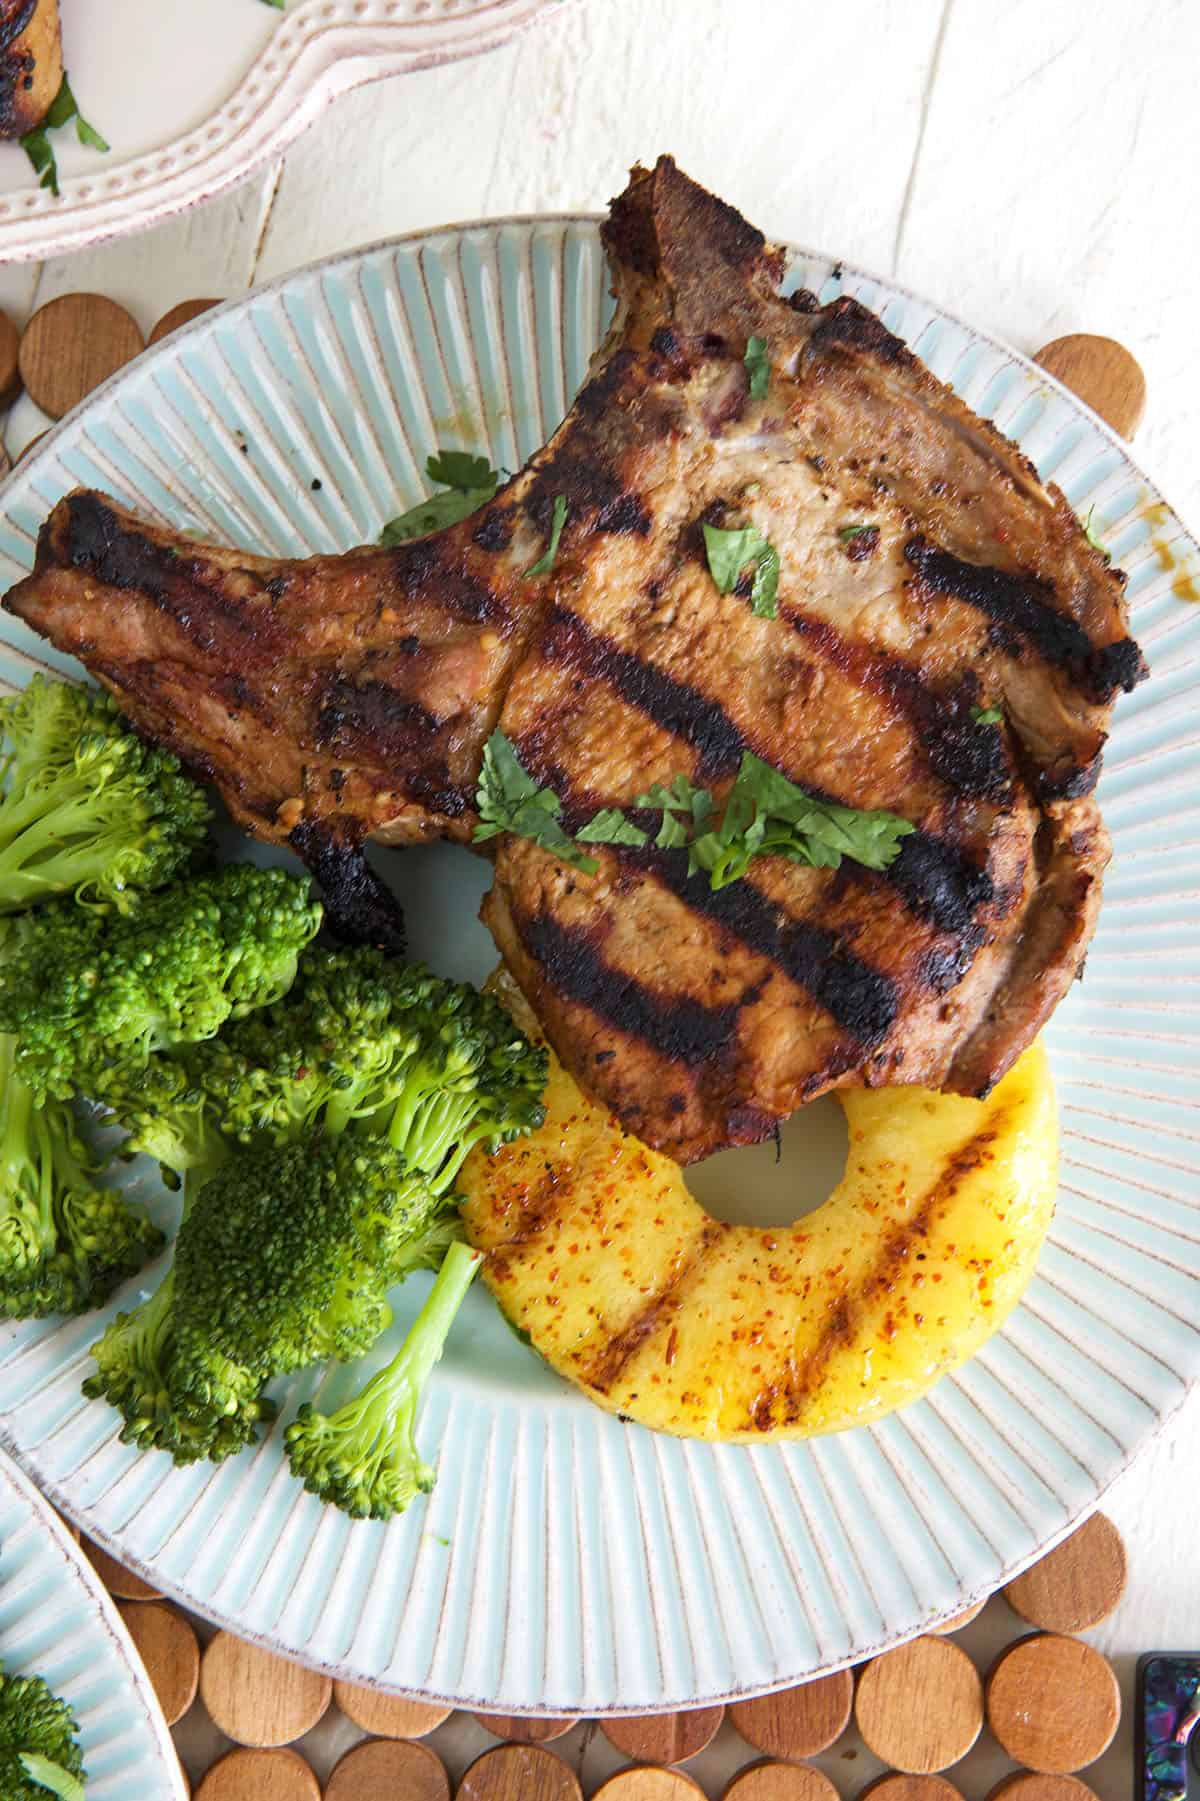 Pineapple and broccoli is placed next to a grilled pork chop. 